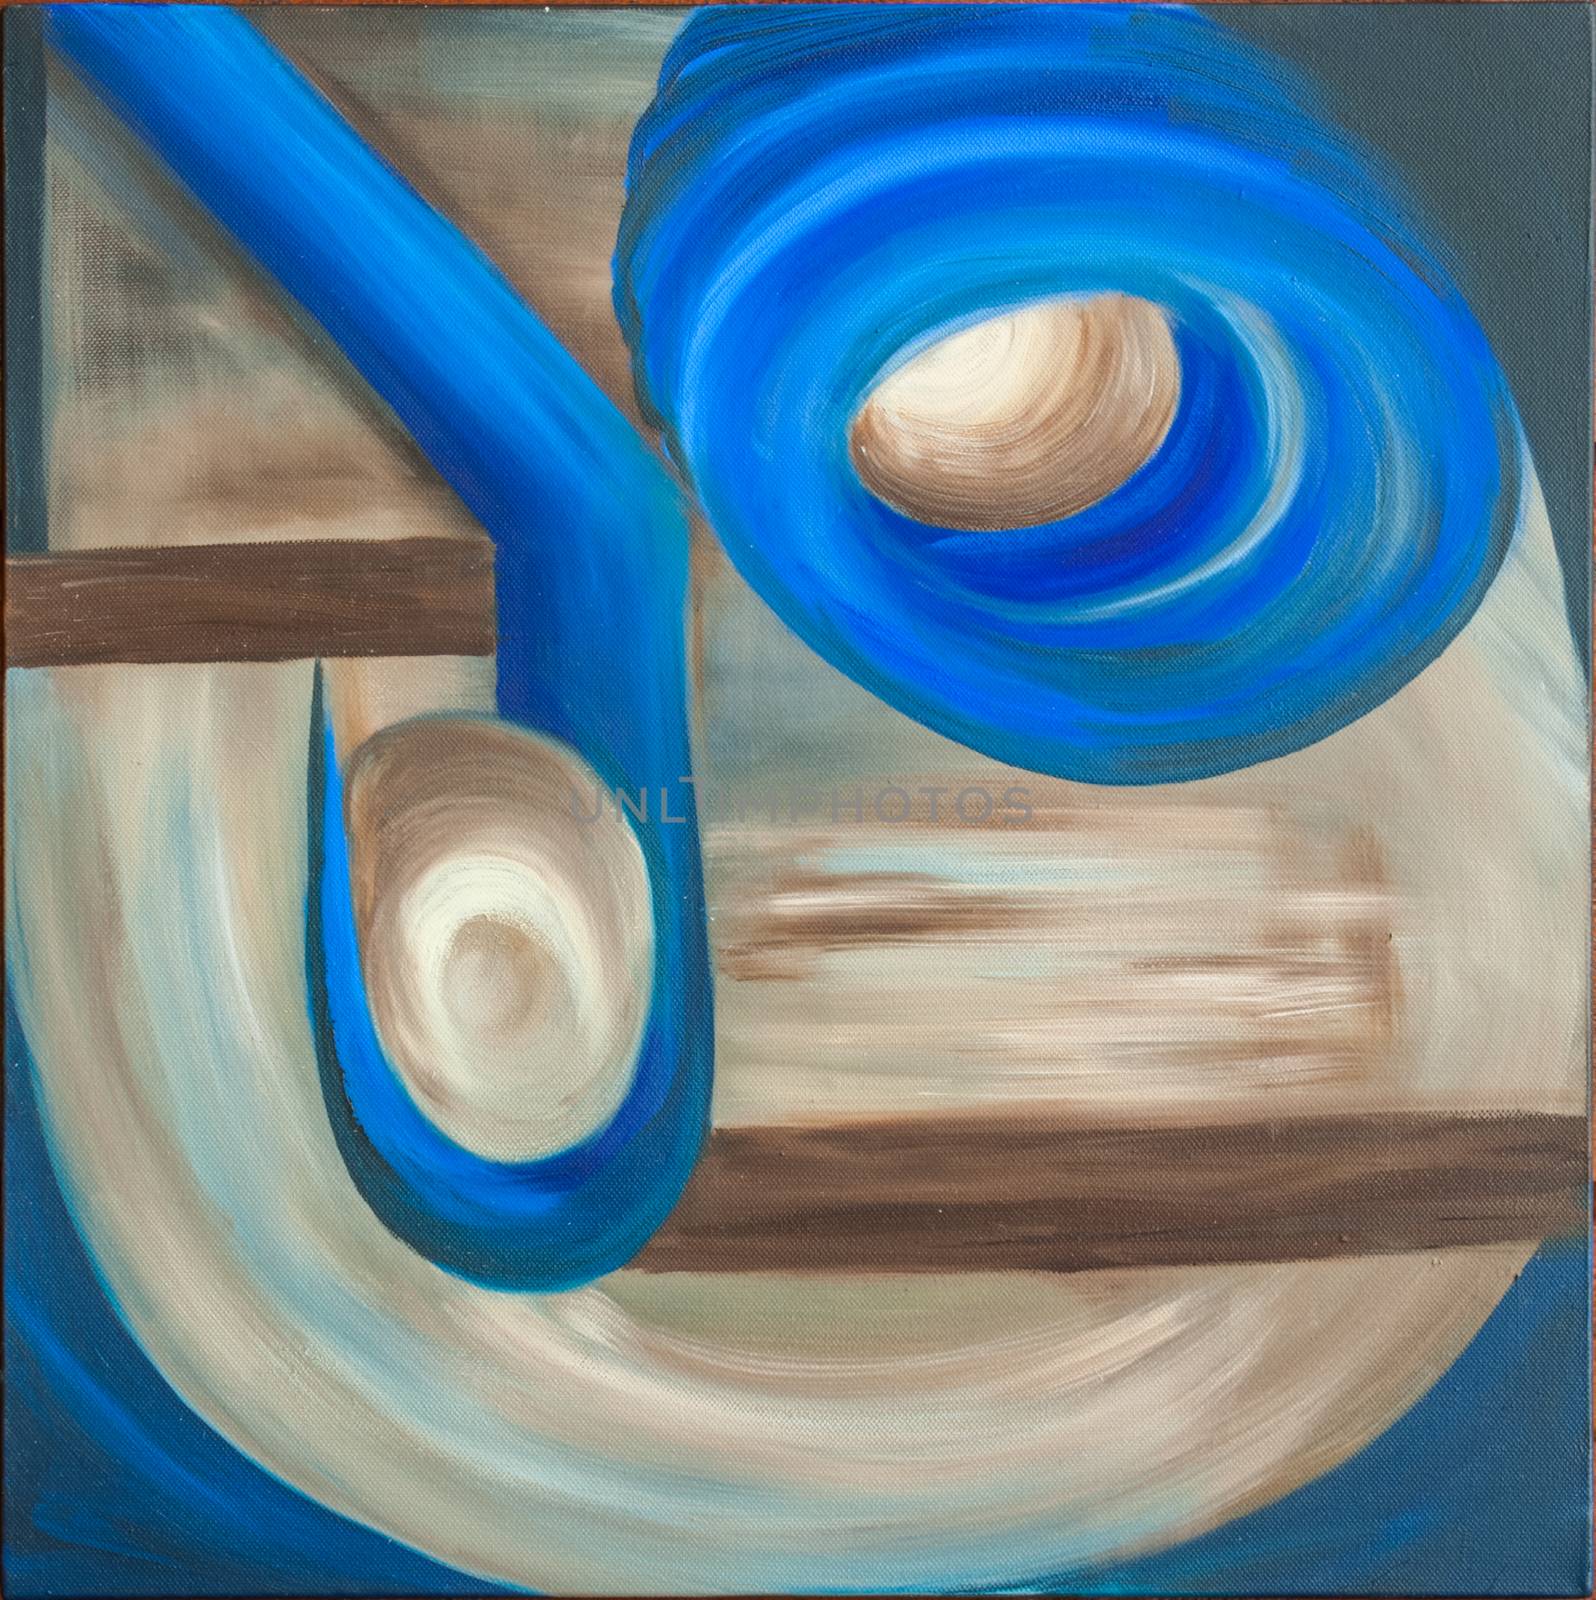 Abstract oil painting on canvas containing circular blue elements